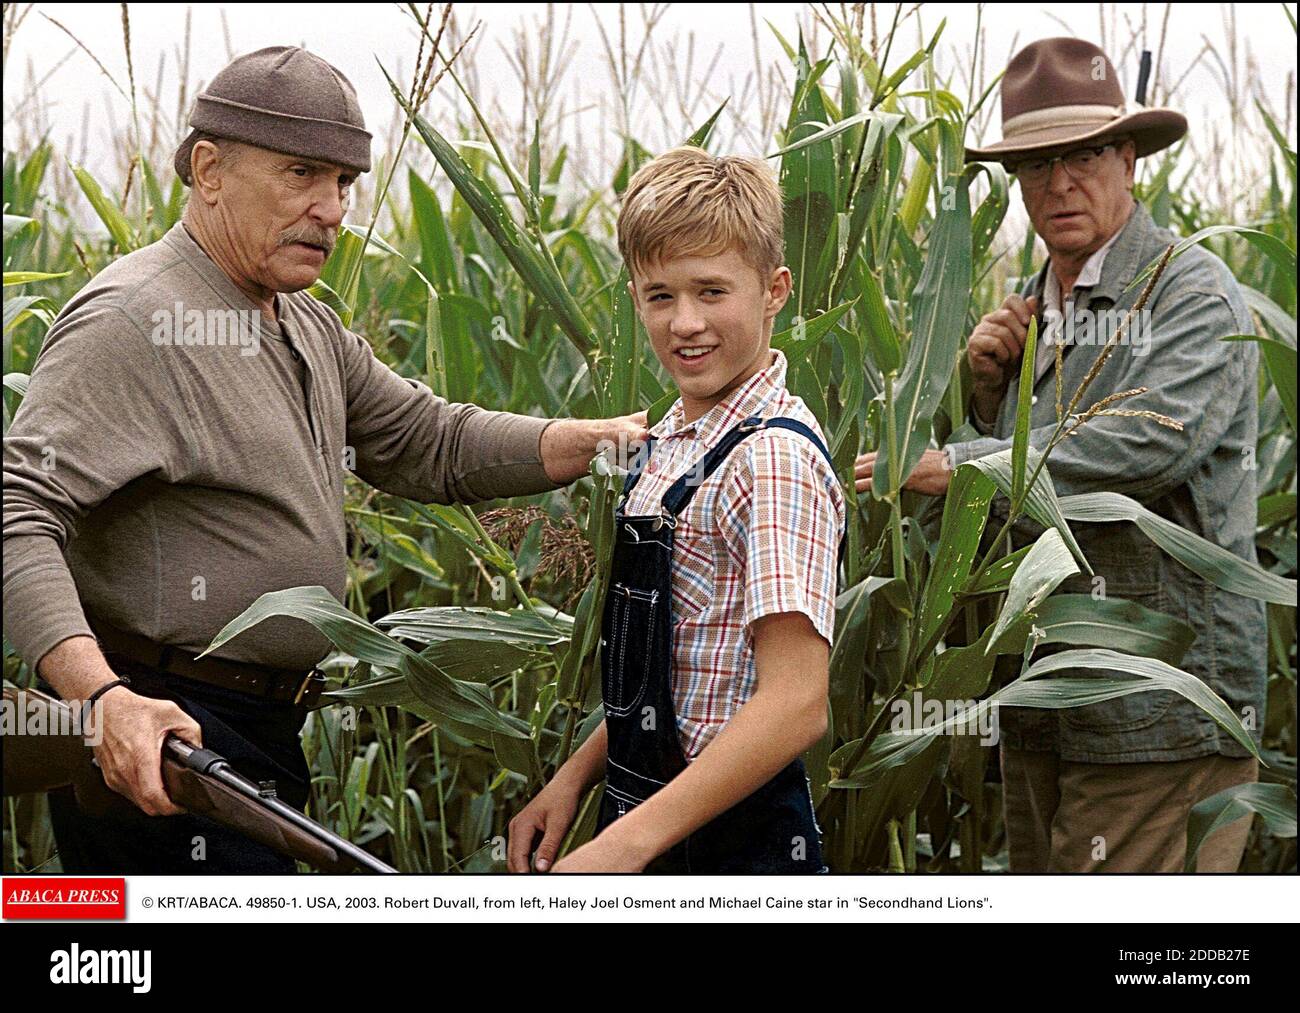 secondhand lions characters